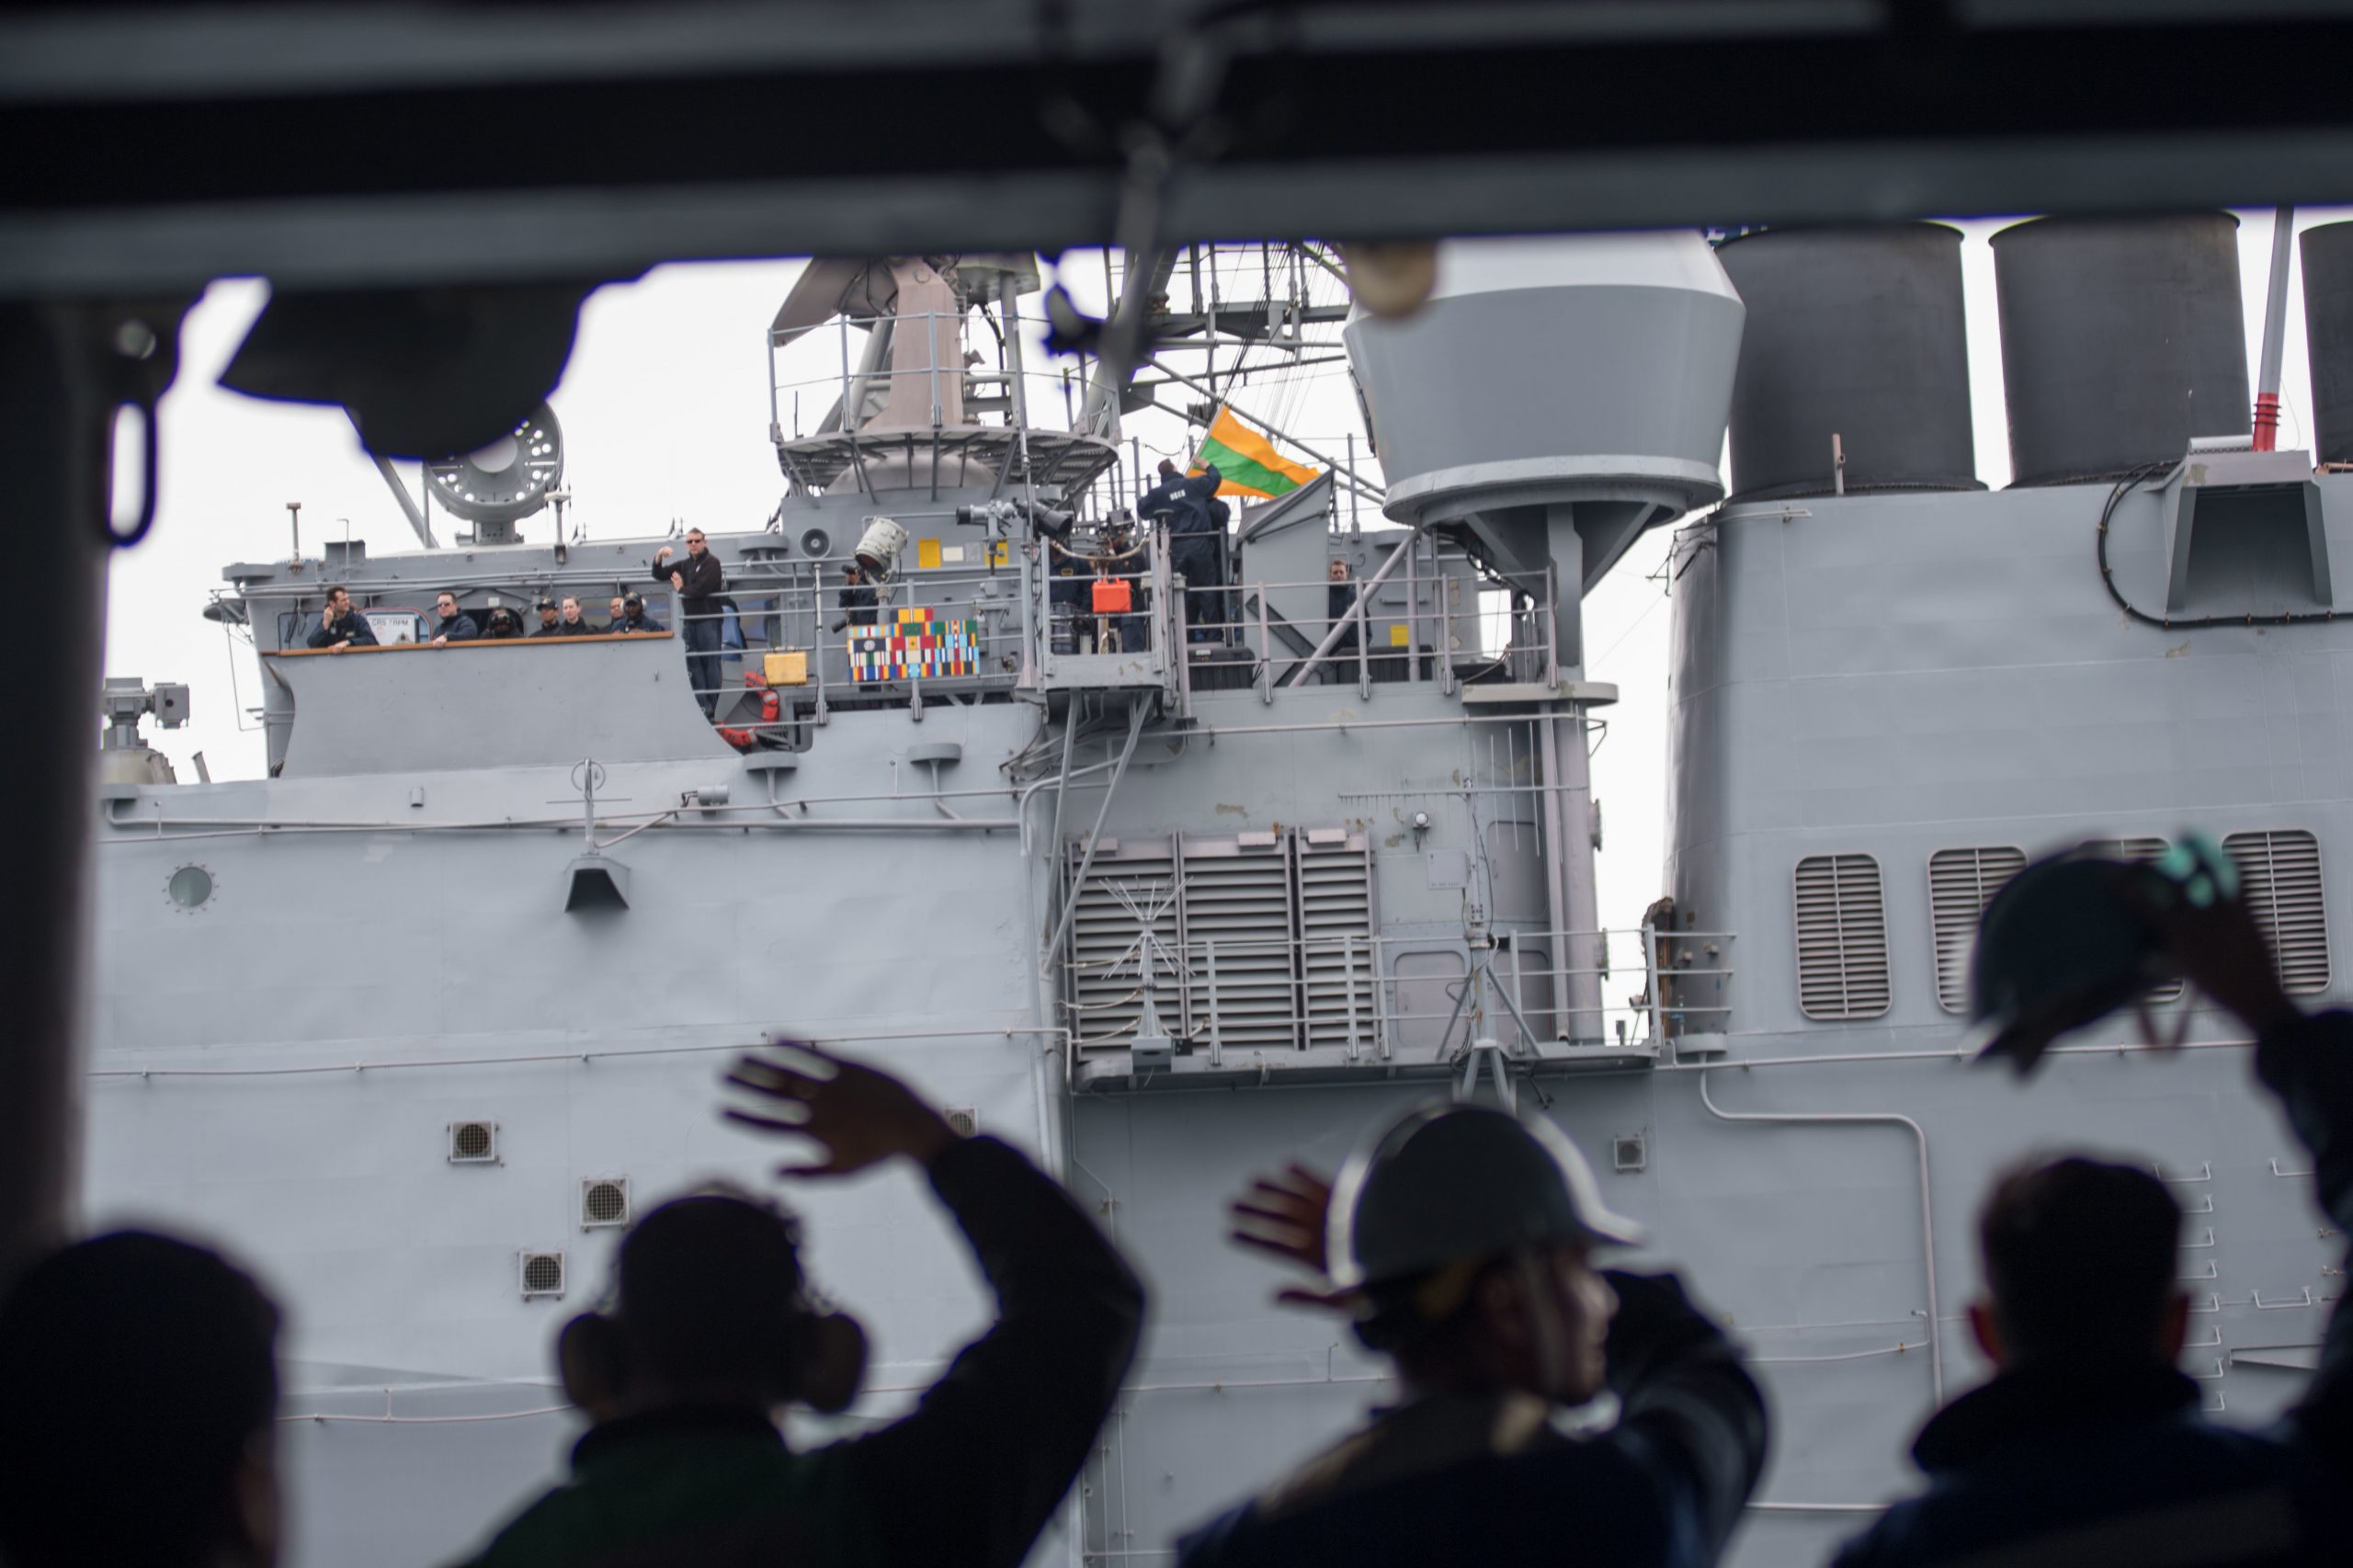 PACIFIC OCEAN (May 7, 2018) Sailors assigned to the aircraft carrier USS John C. Stennis (CVN 74) wave to Sailors aboard the Ticonderoga-class cruiser USS Mobile Bay (CG 53) during a replenishment-at-sea exercise. John C. Stennis is underway with the ships and squadrons of Carrier Strike Group (CSG) 3 conducting group sail training in preparation for its next scheduled deployment. U.S. Navy photo by Mass Communication Specialist 3rd Class William Ford. -